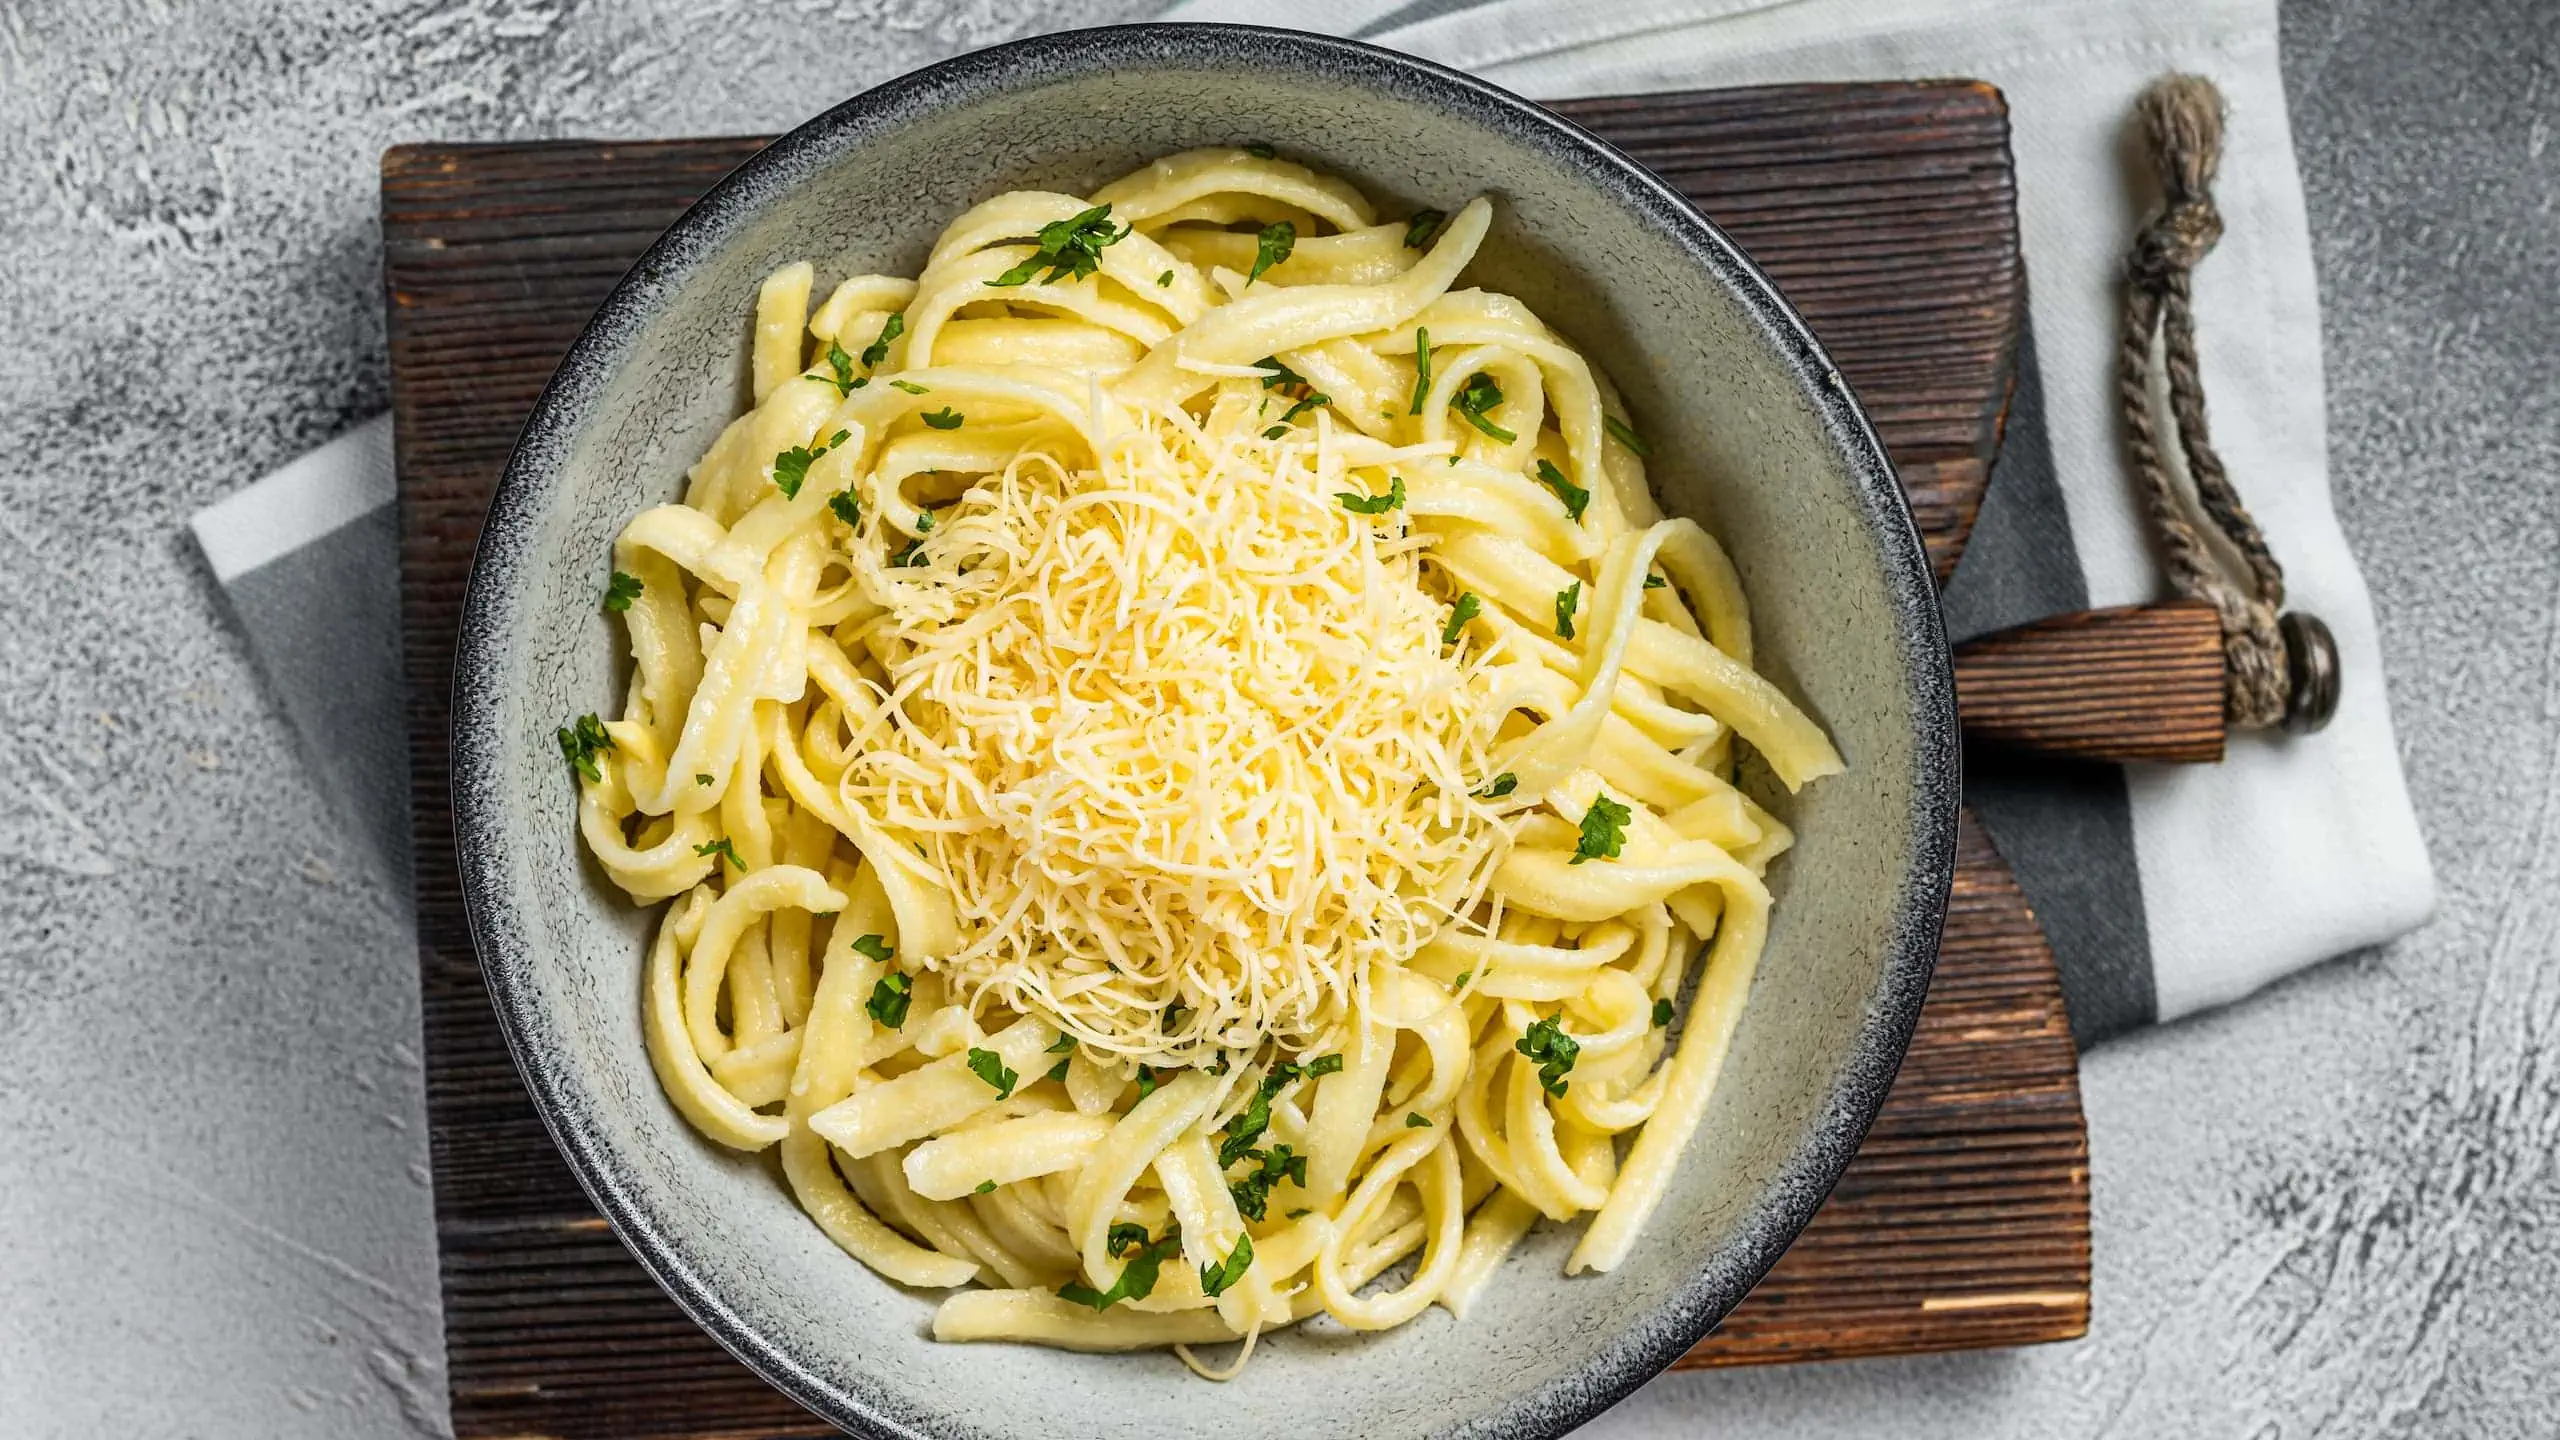 Our version of butter noodle recipe from Noodles and Company